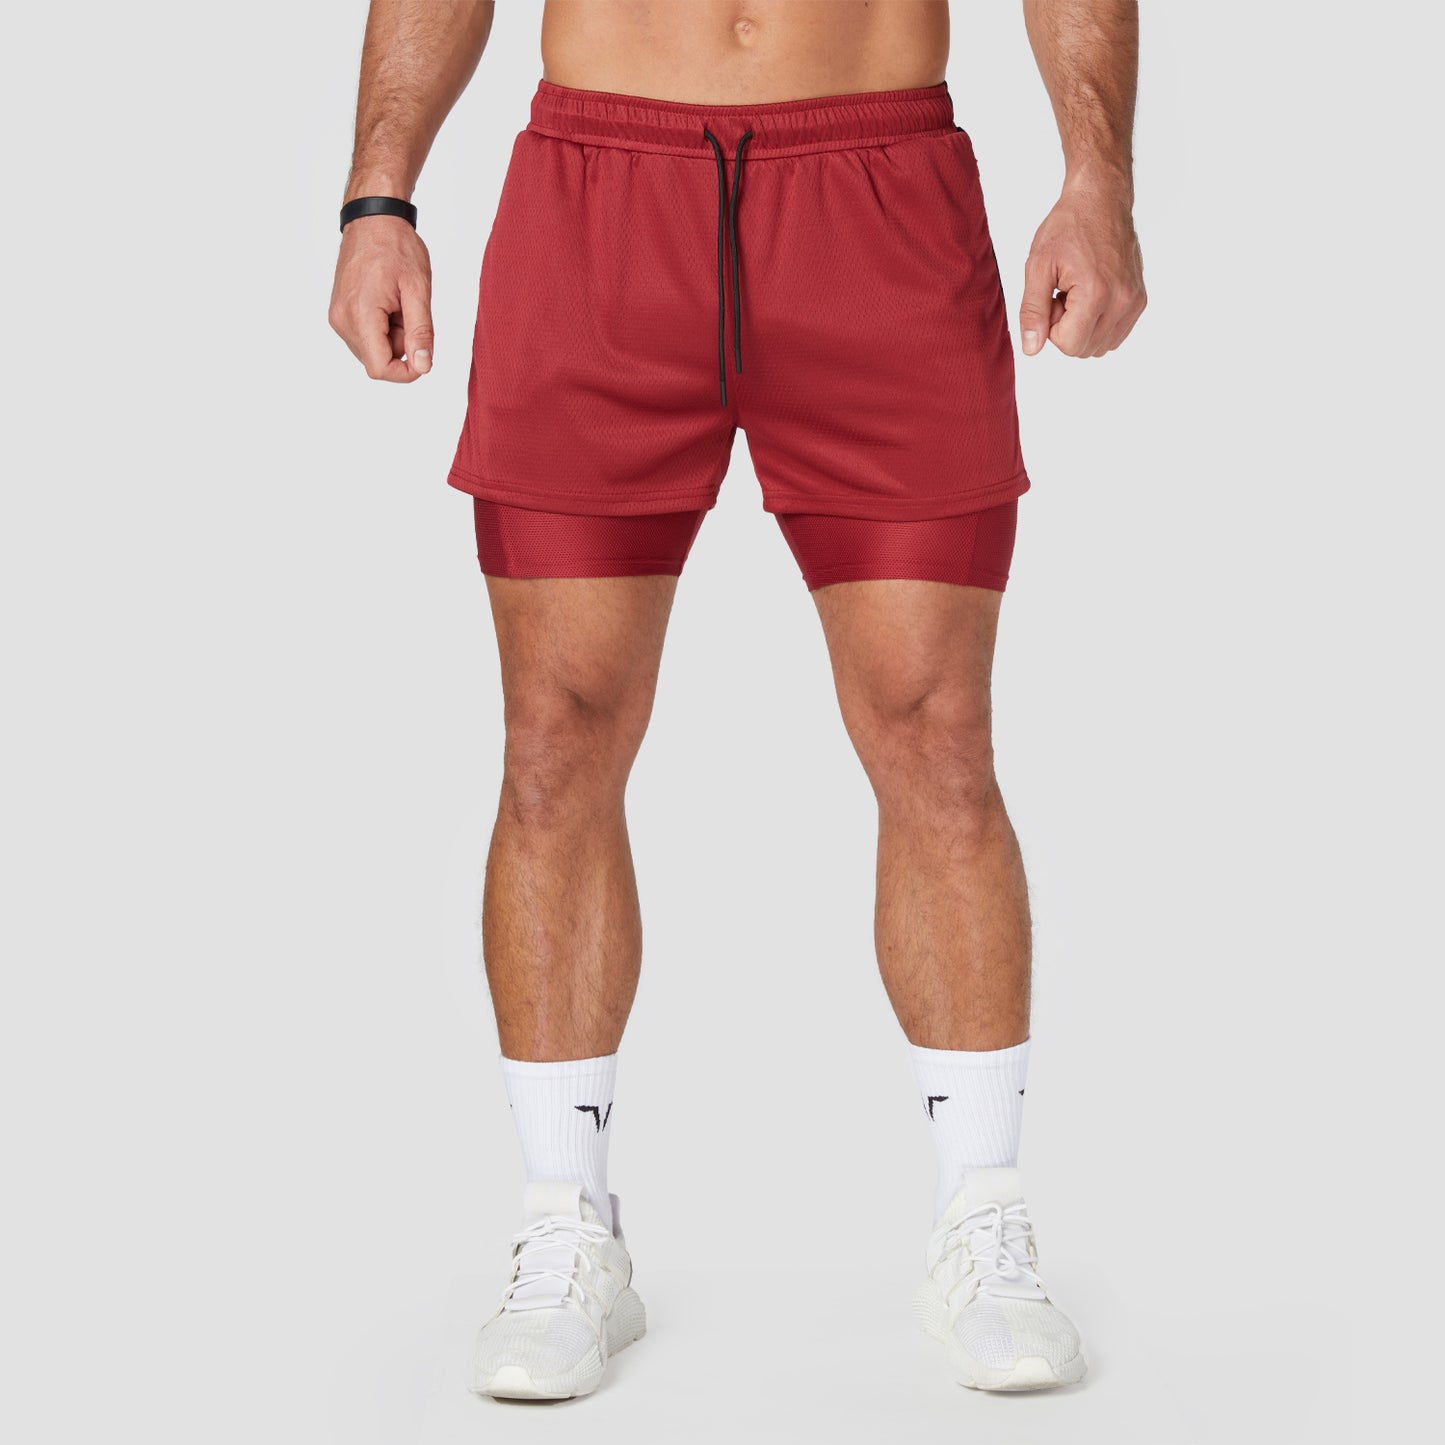 squatwolf-gym-wear-hybrid-performance-2-in-1-shorts-maroon-workout-shorts-for-men